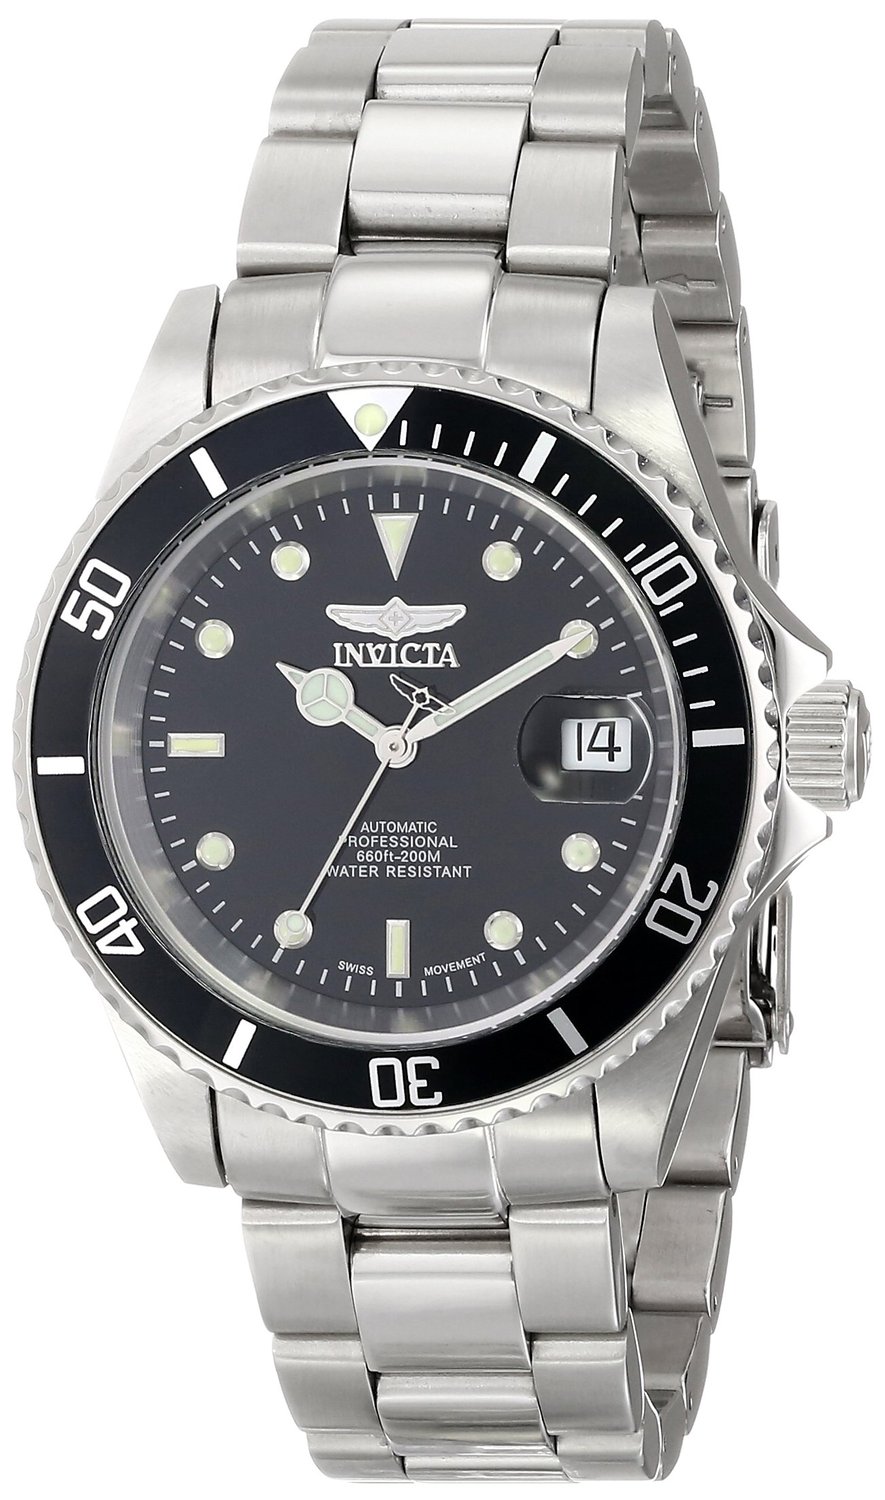 Invicta watch review